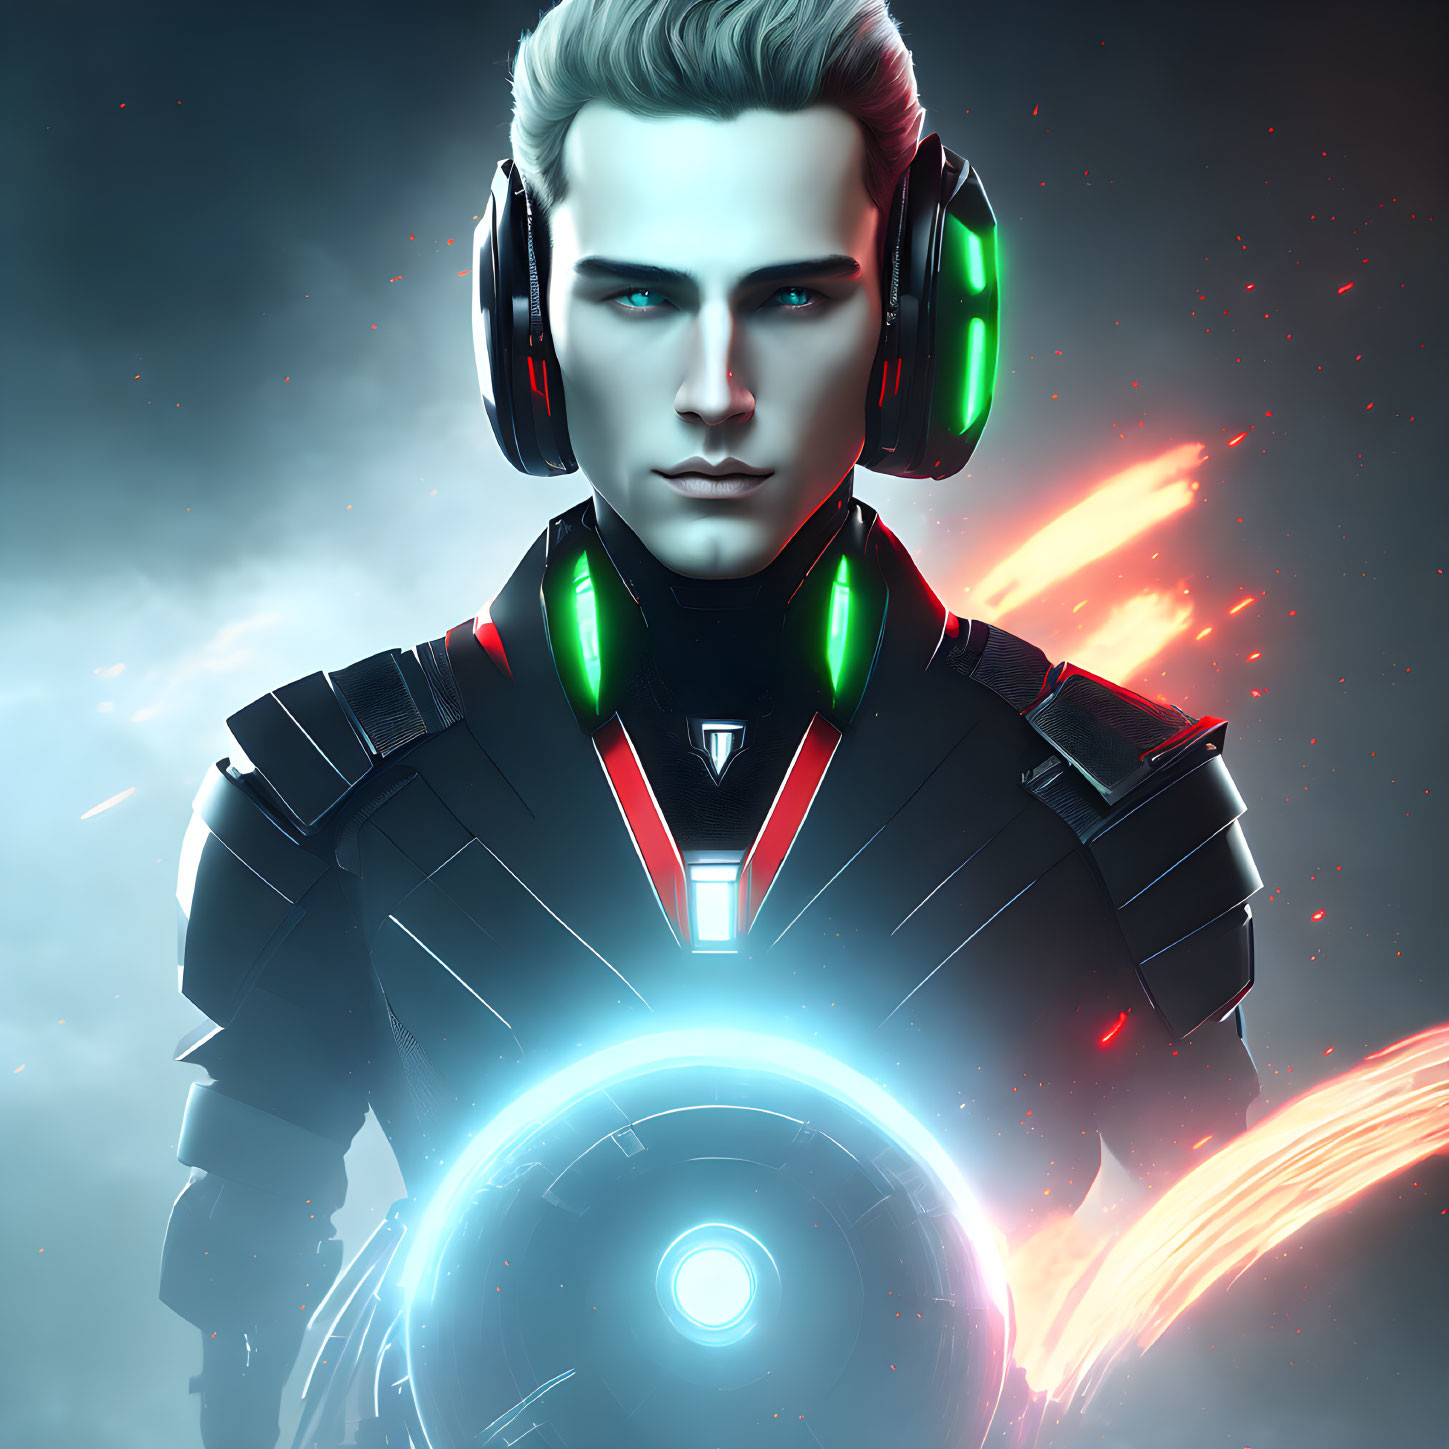 Futuristic male figure in high-tech suit with glowing blue eyes and headphones against red sparks background